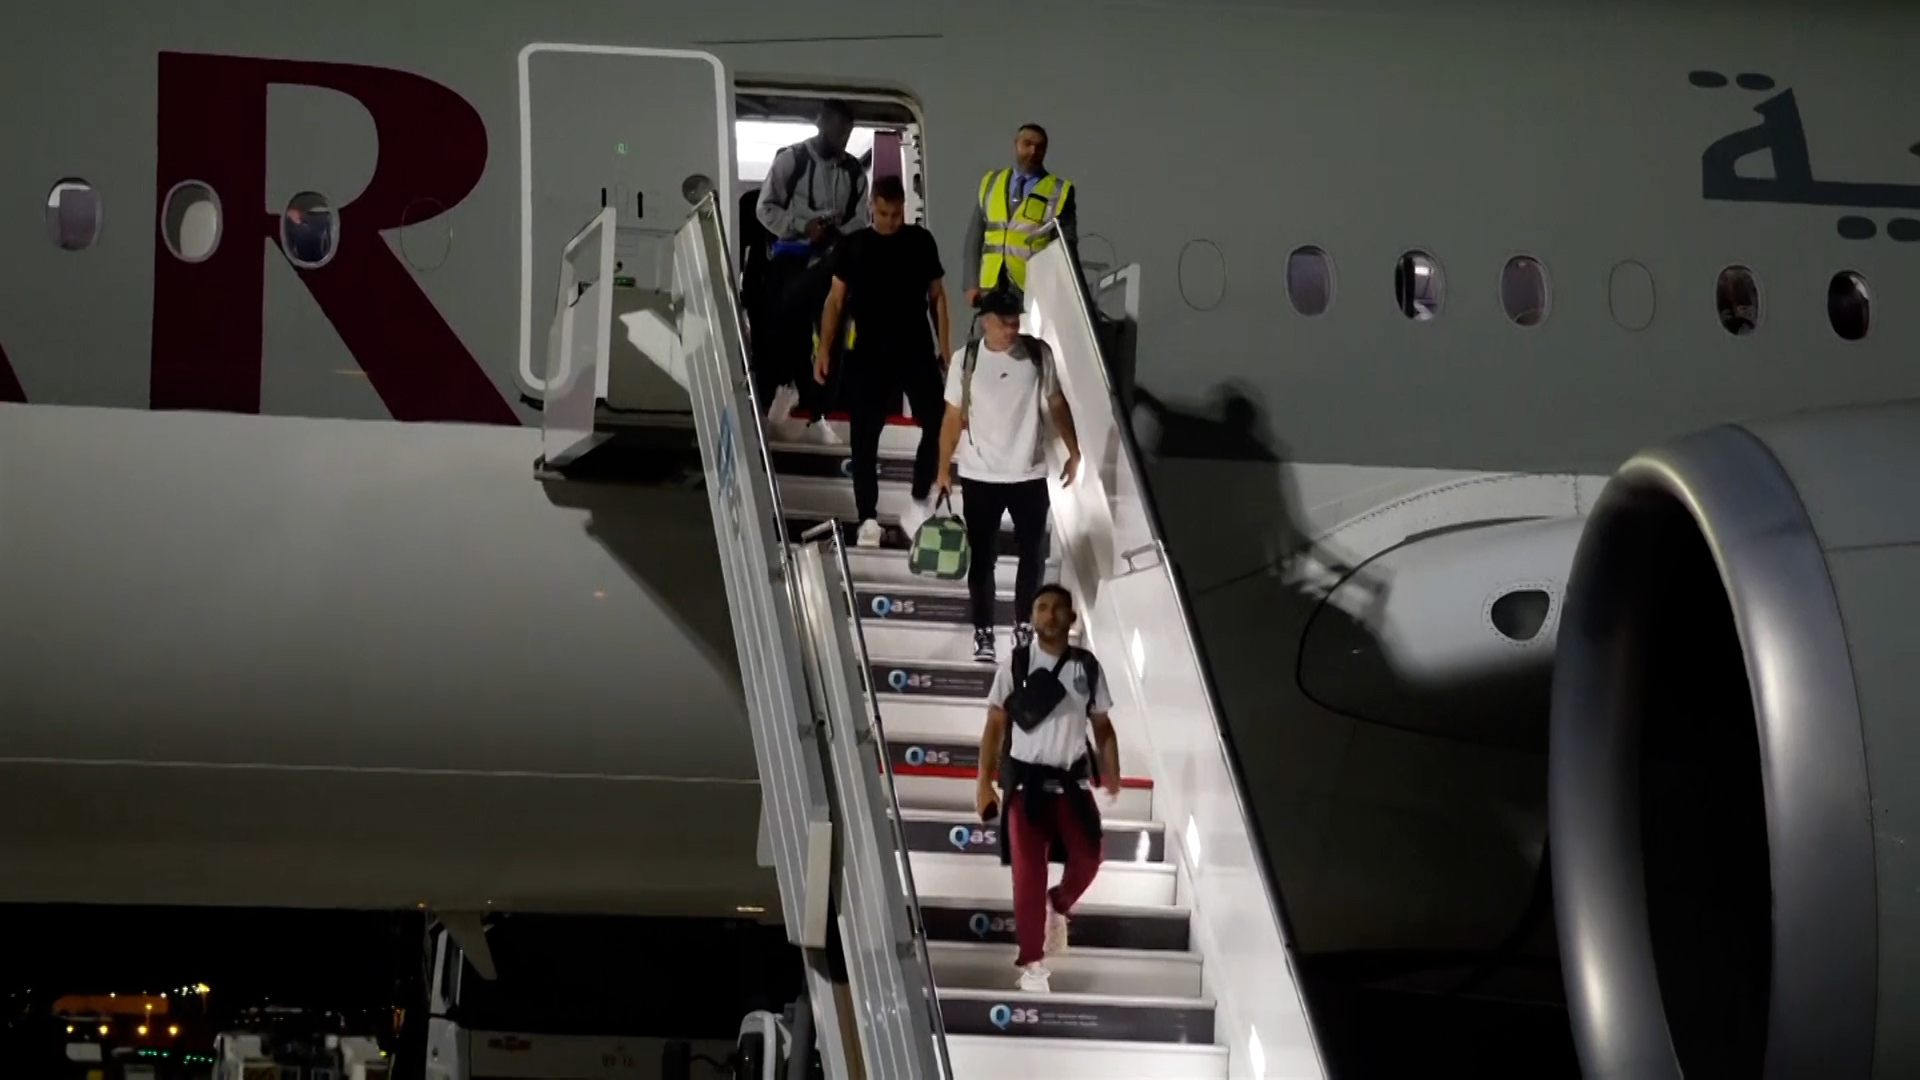 MLS-based USMNT players land in Doha ahead of Qatar World Cup